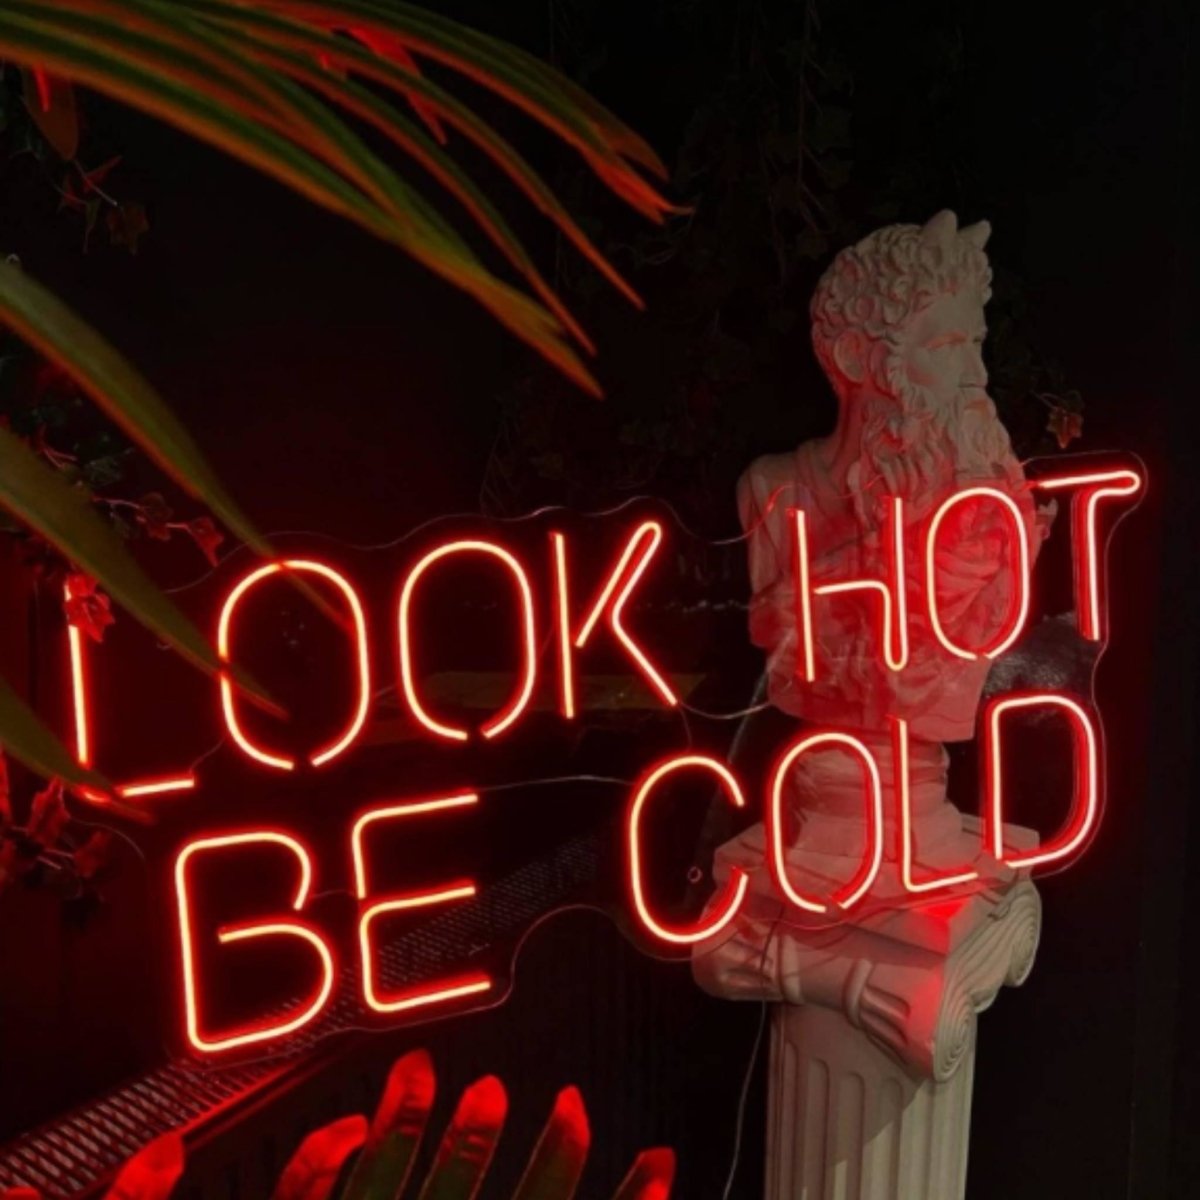 Look Hot Be Cold - Artchi